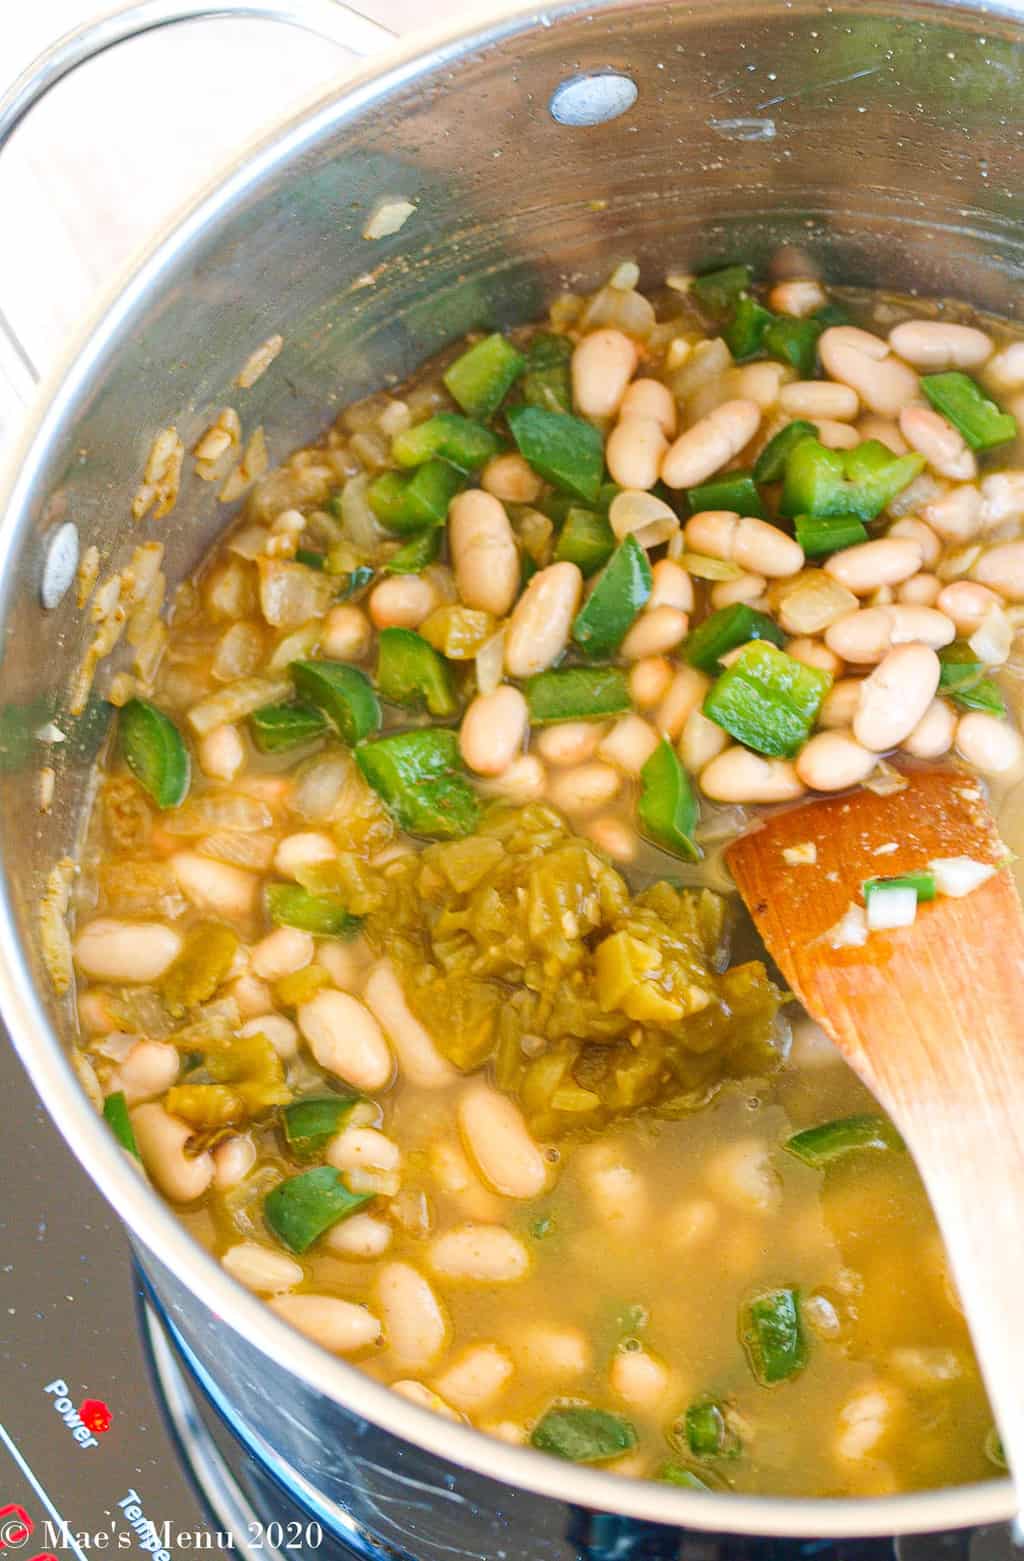 Beans, green pepper, white bean, green chiles, and chicken stock in a pot